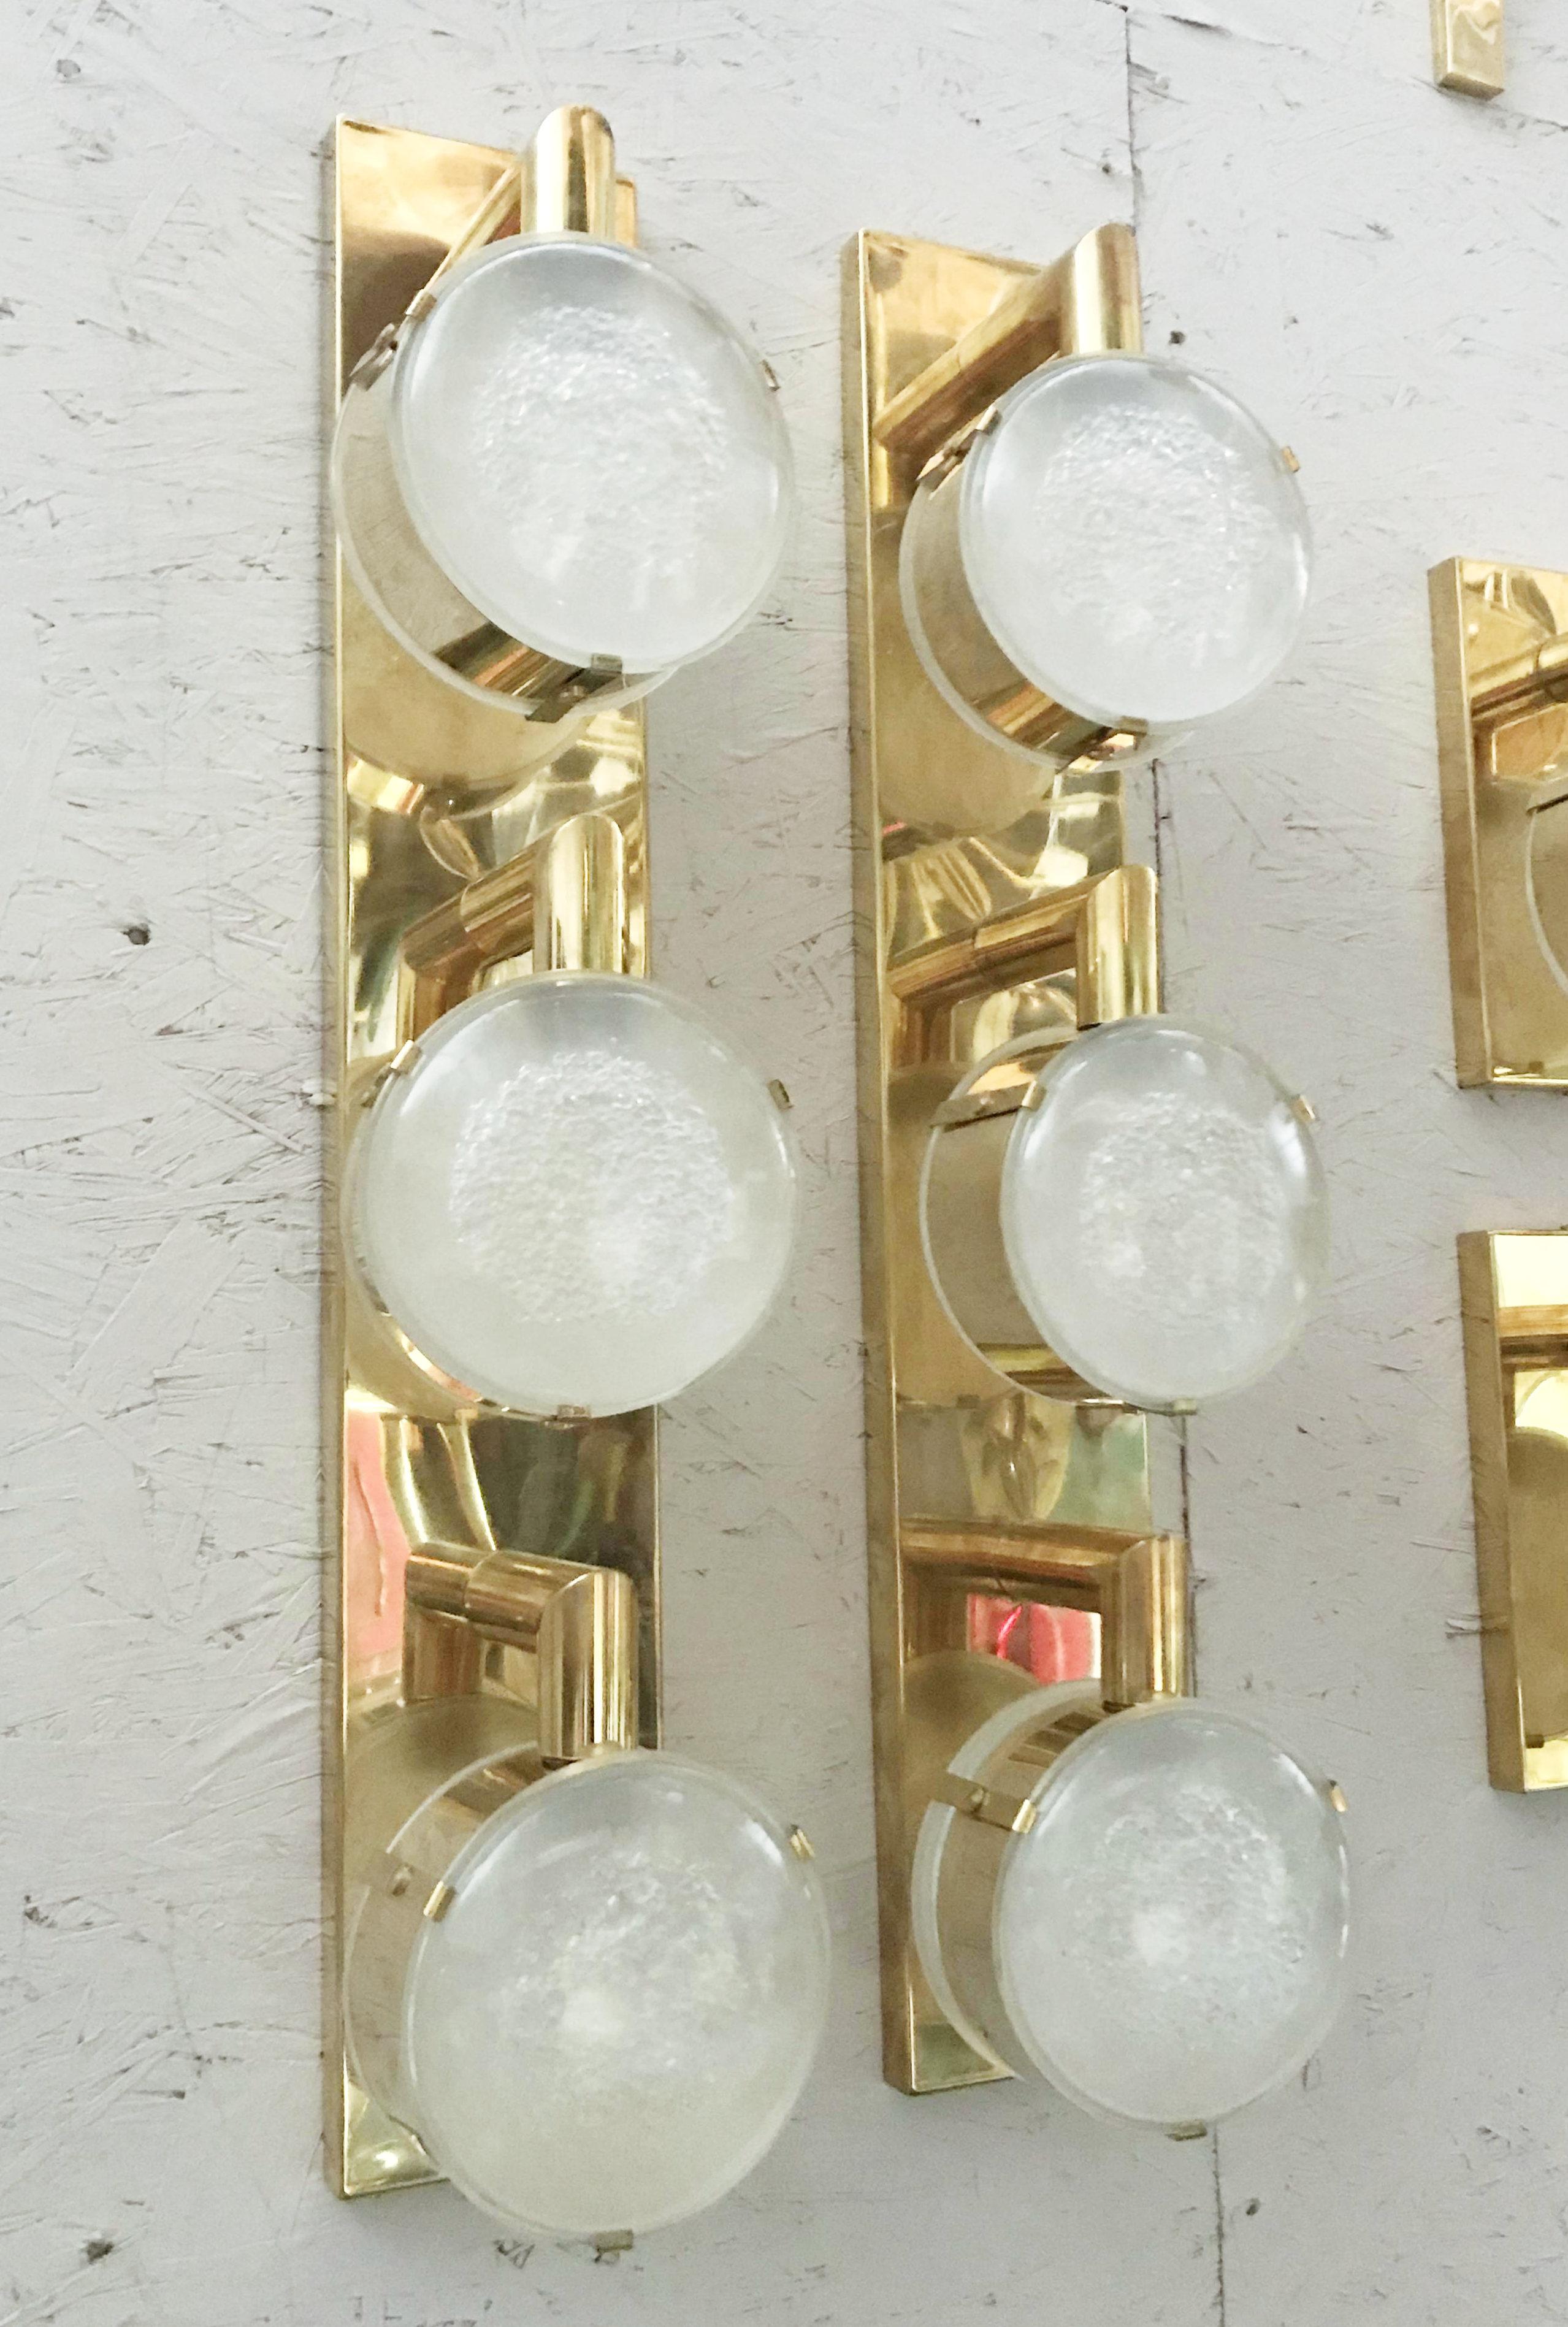 Limited edition Italian wall lights with six large Murano frosted glass lenses on semi-polished brass brackets, designed by Fabio Bergomi for Fabio Ltd / Made in Italy
3 lights rotatable / E12 or E14 type/ max 40W each
Measures: Height 29.5 inches,